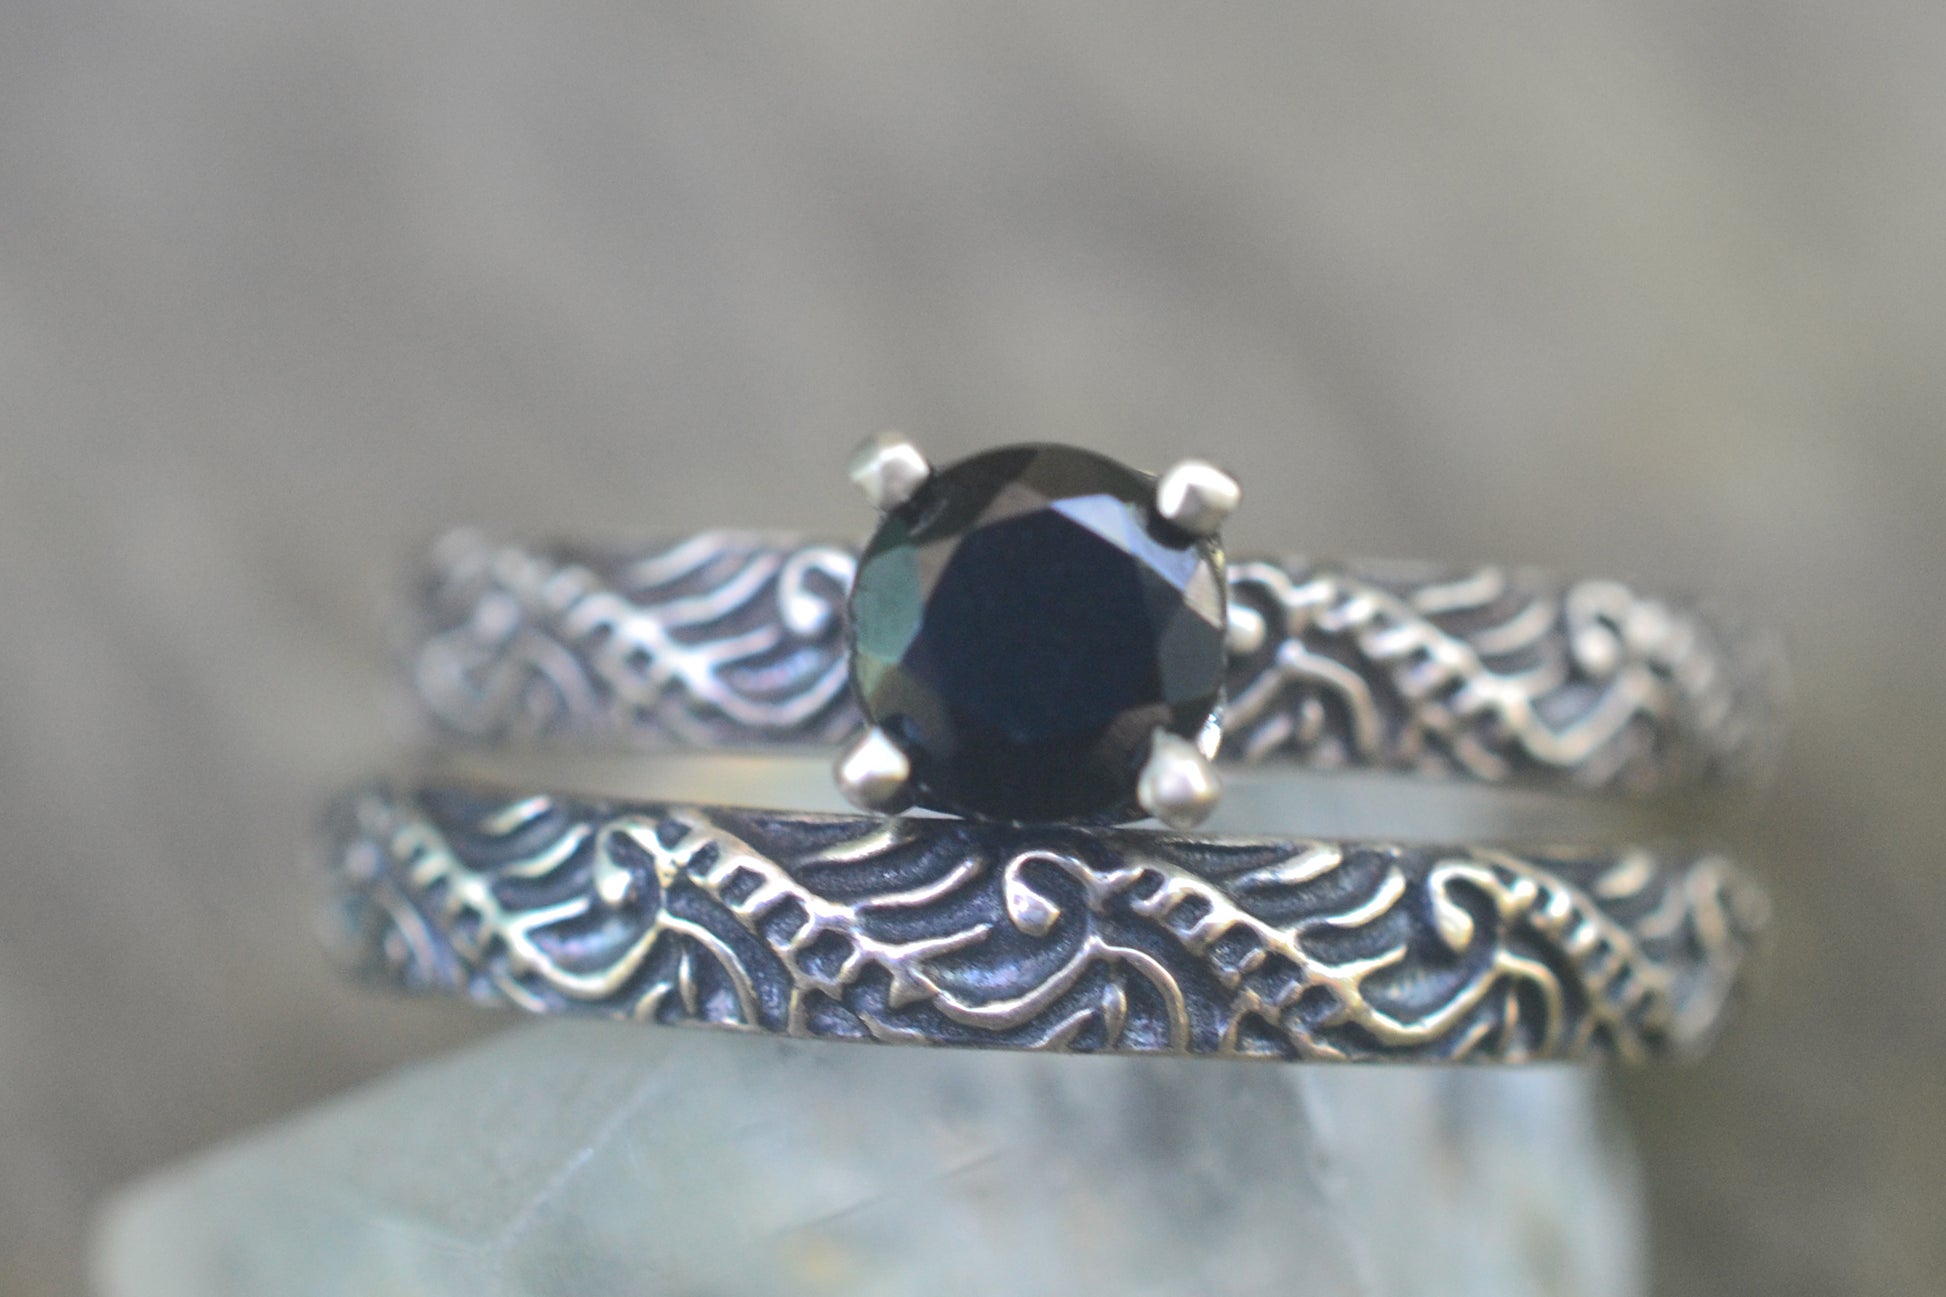 Baroque Style Black Spinel Bridal Set in Silver